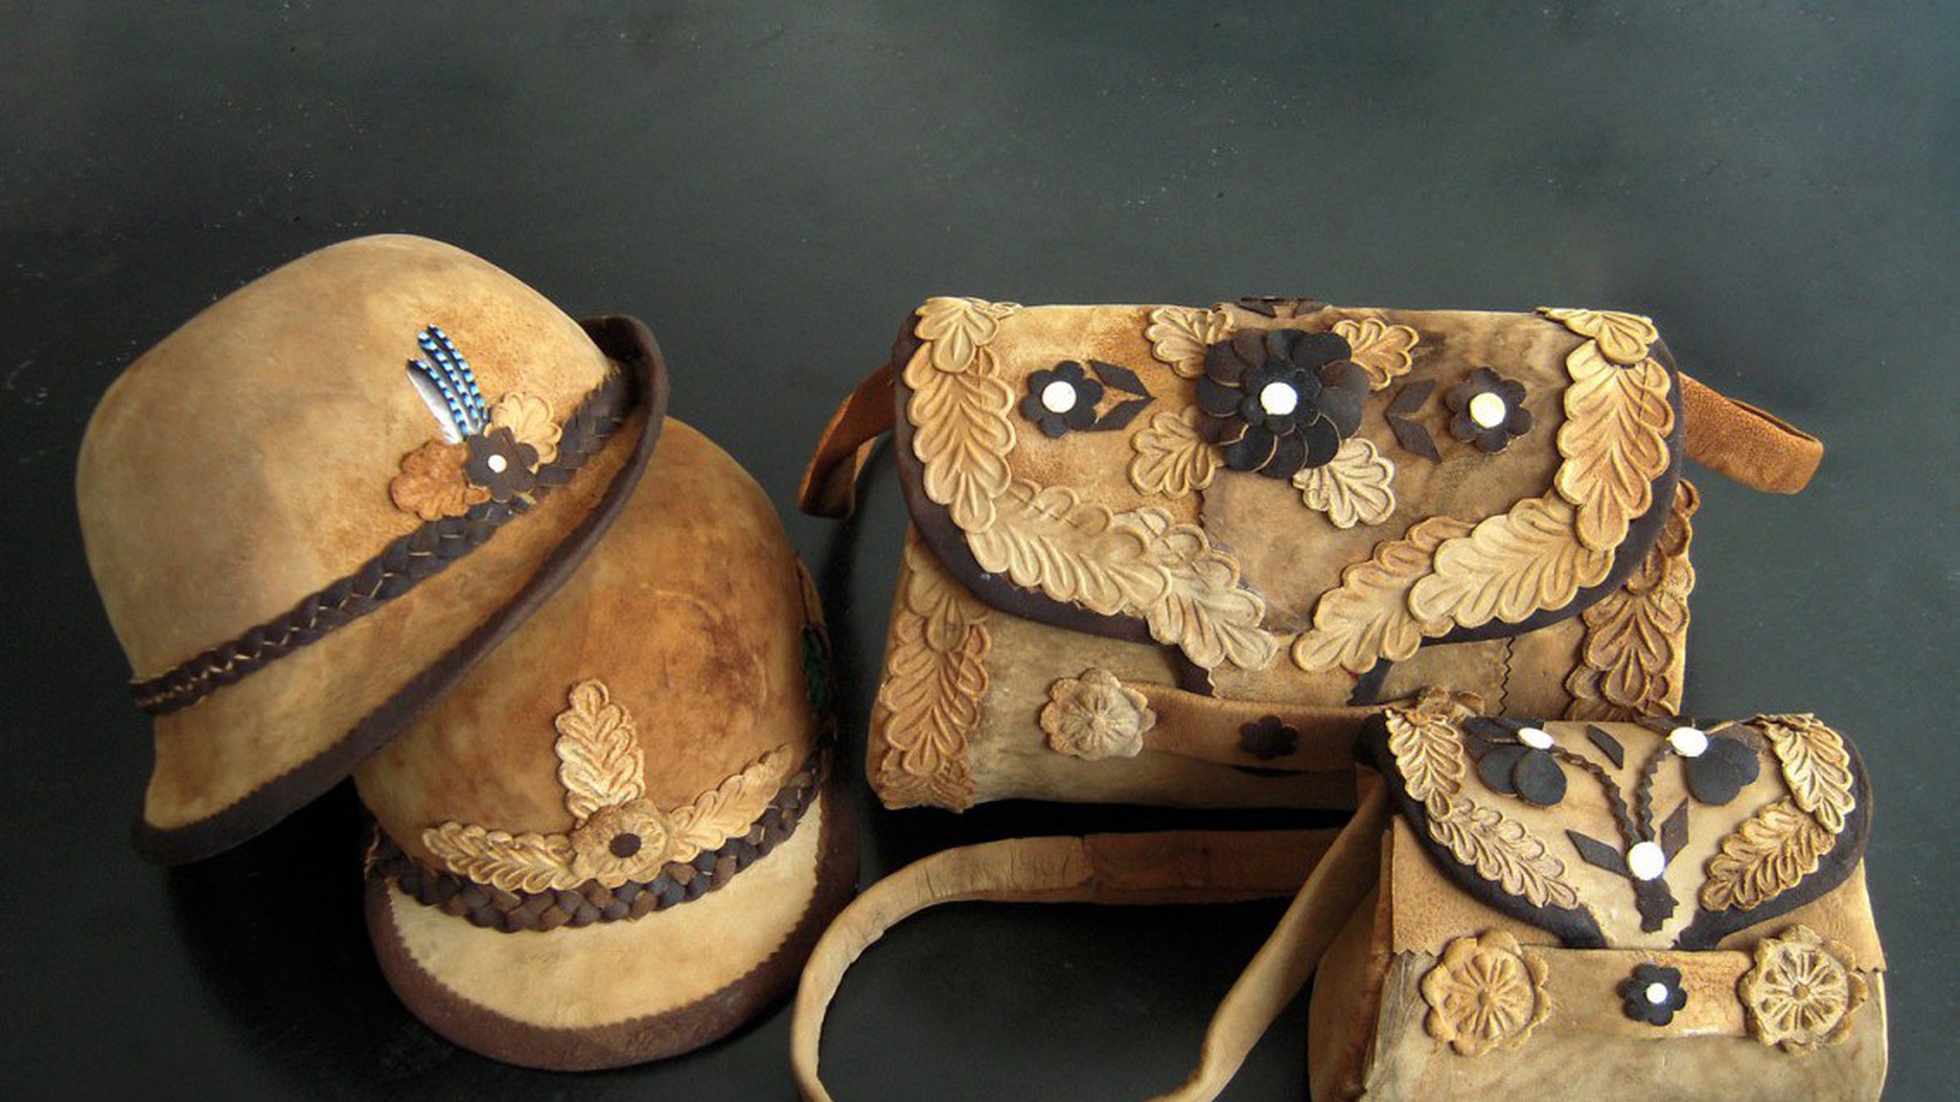 This leather bag is actually made from mushrooms